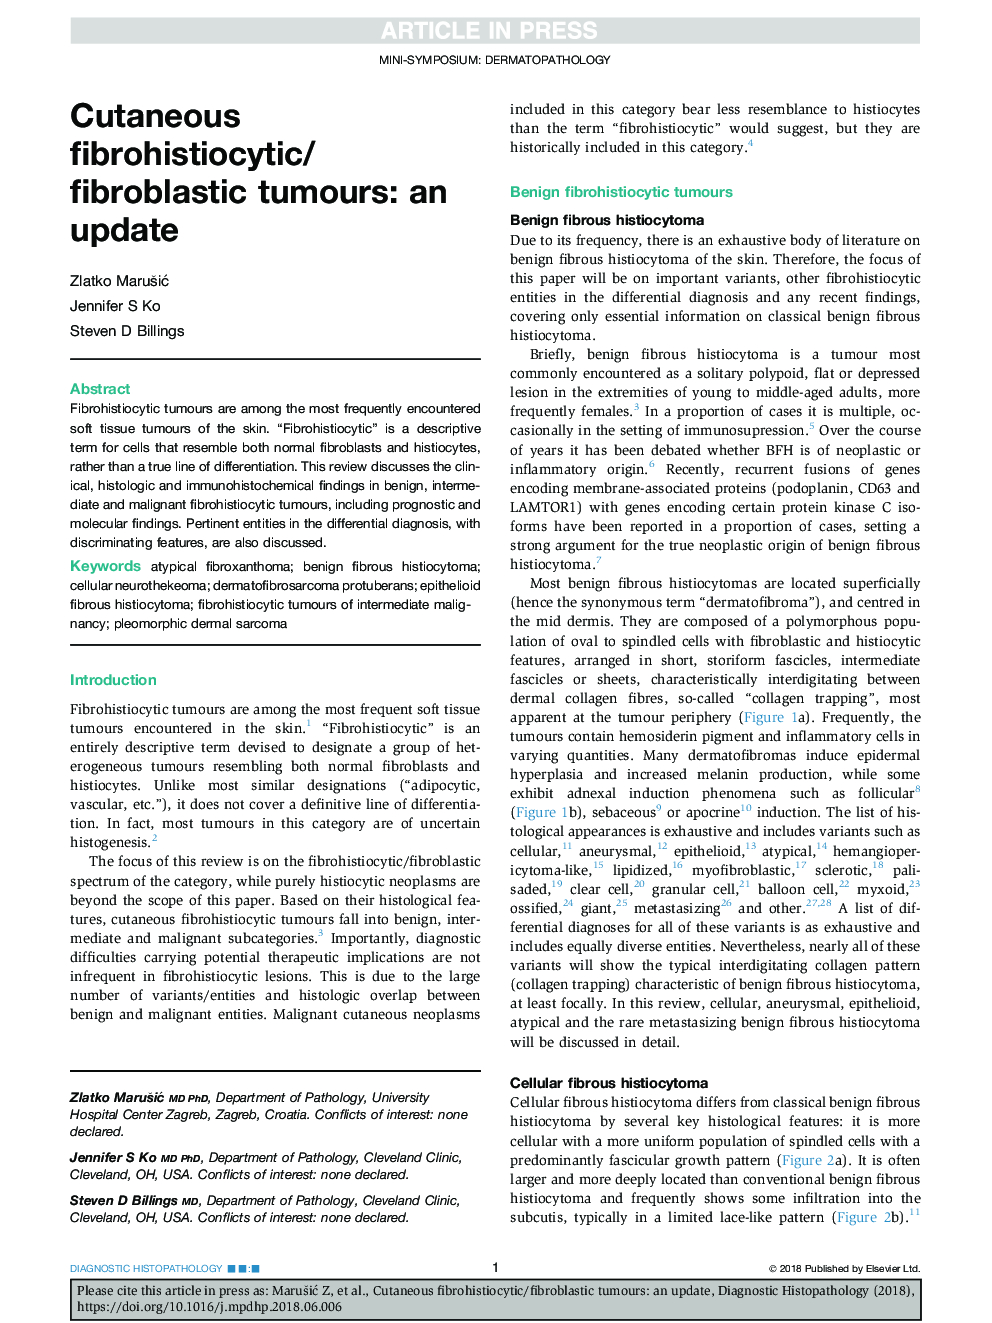 Cutaneous fibrohistiocytic/fibroblastic tumours: an update